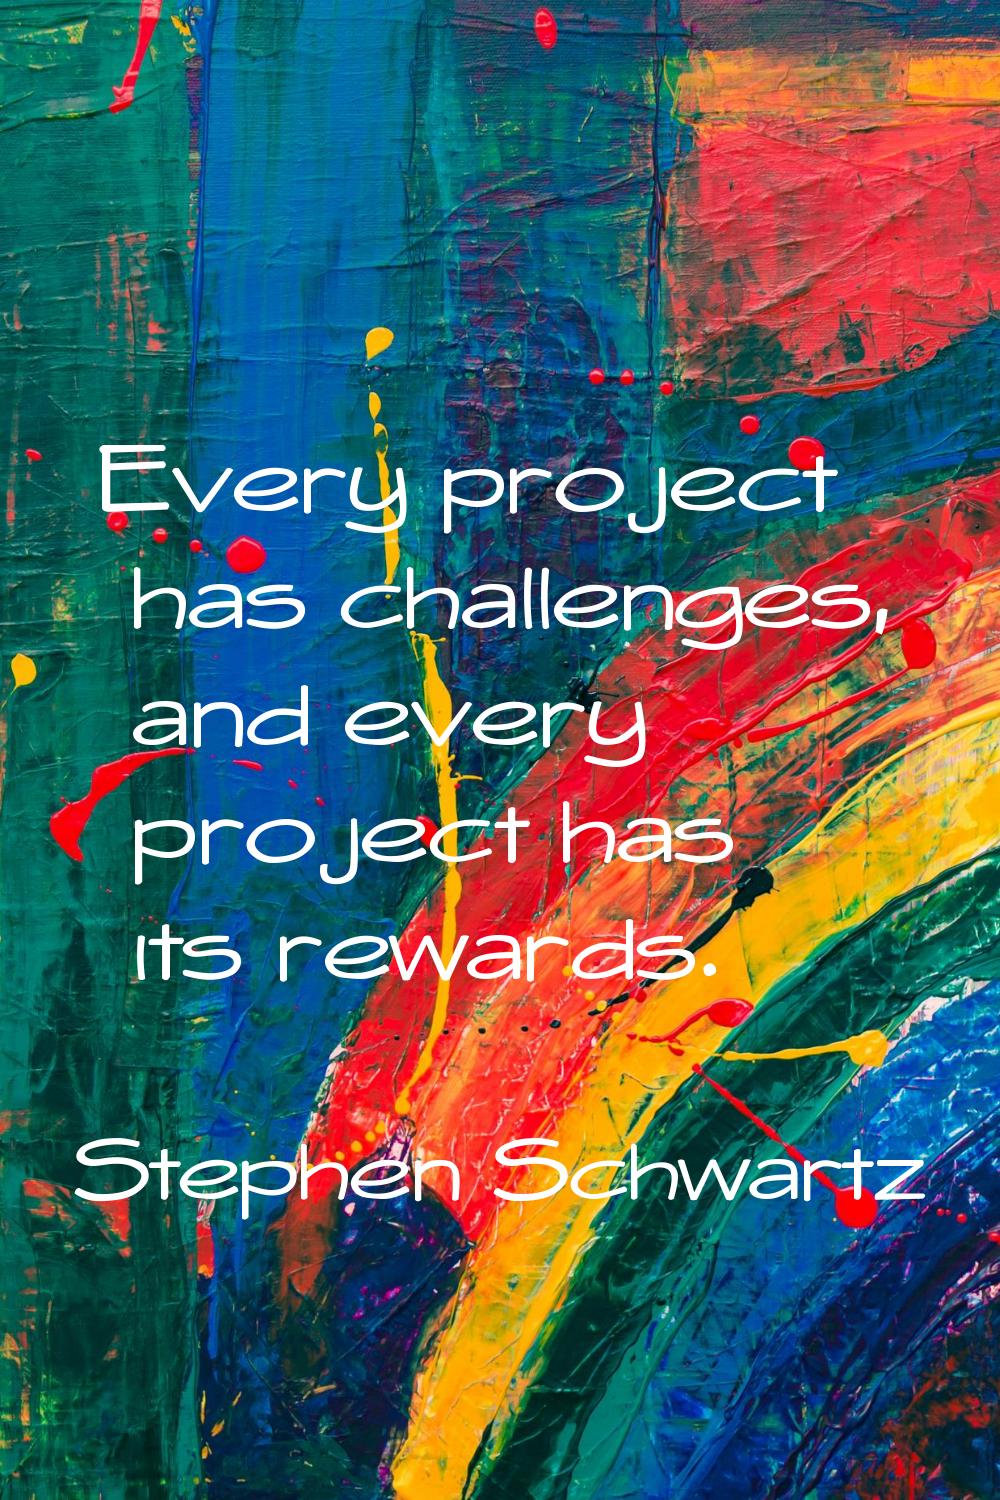 Every project has challenges, and every project has its rewards.